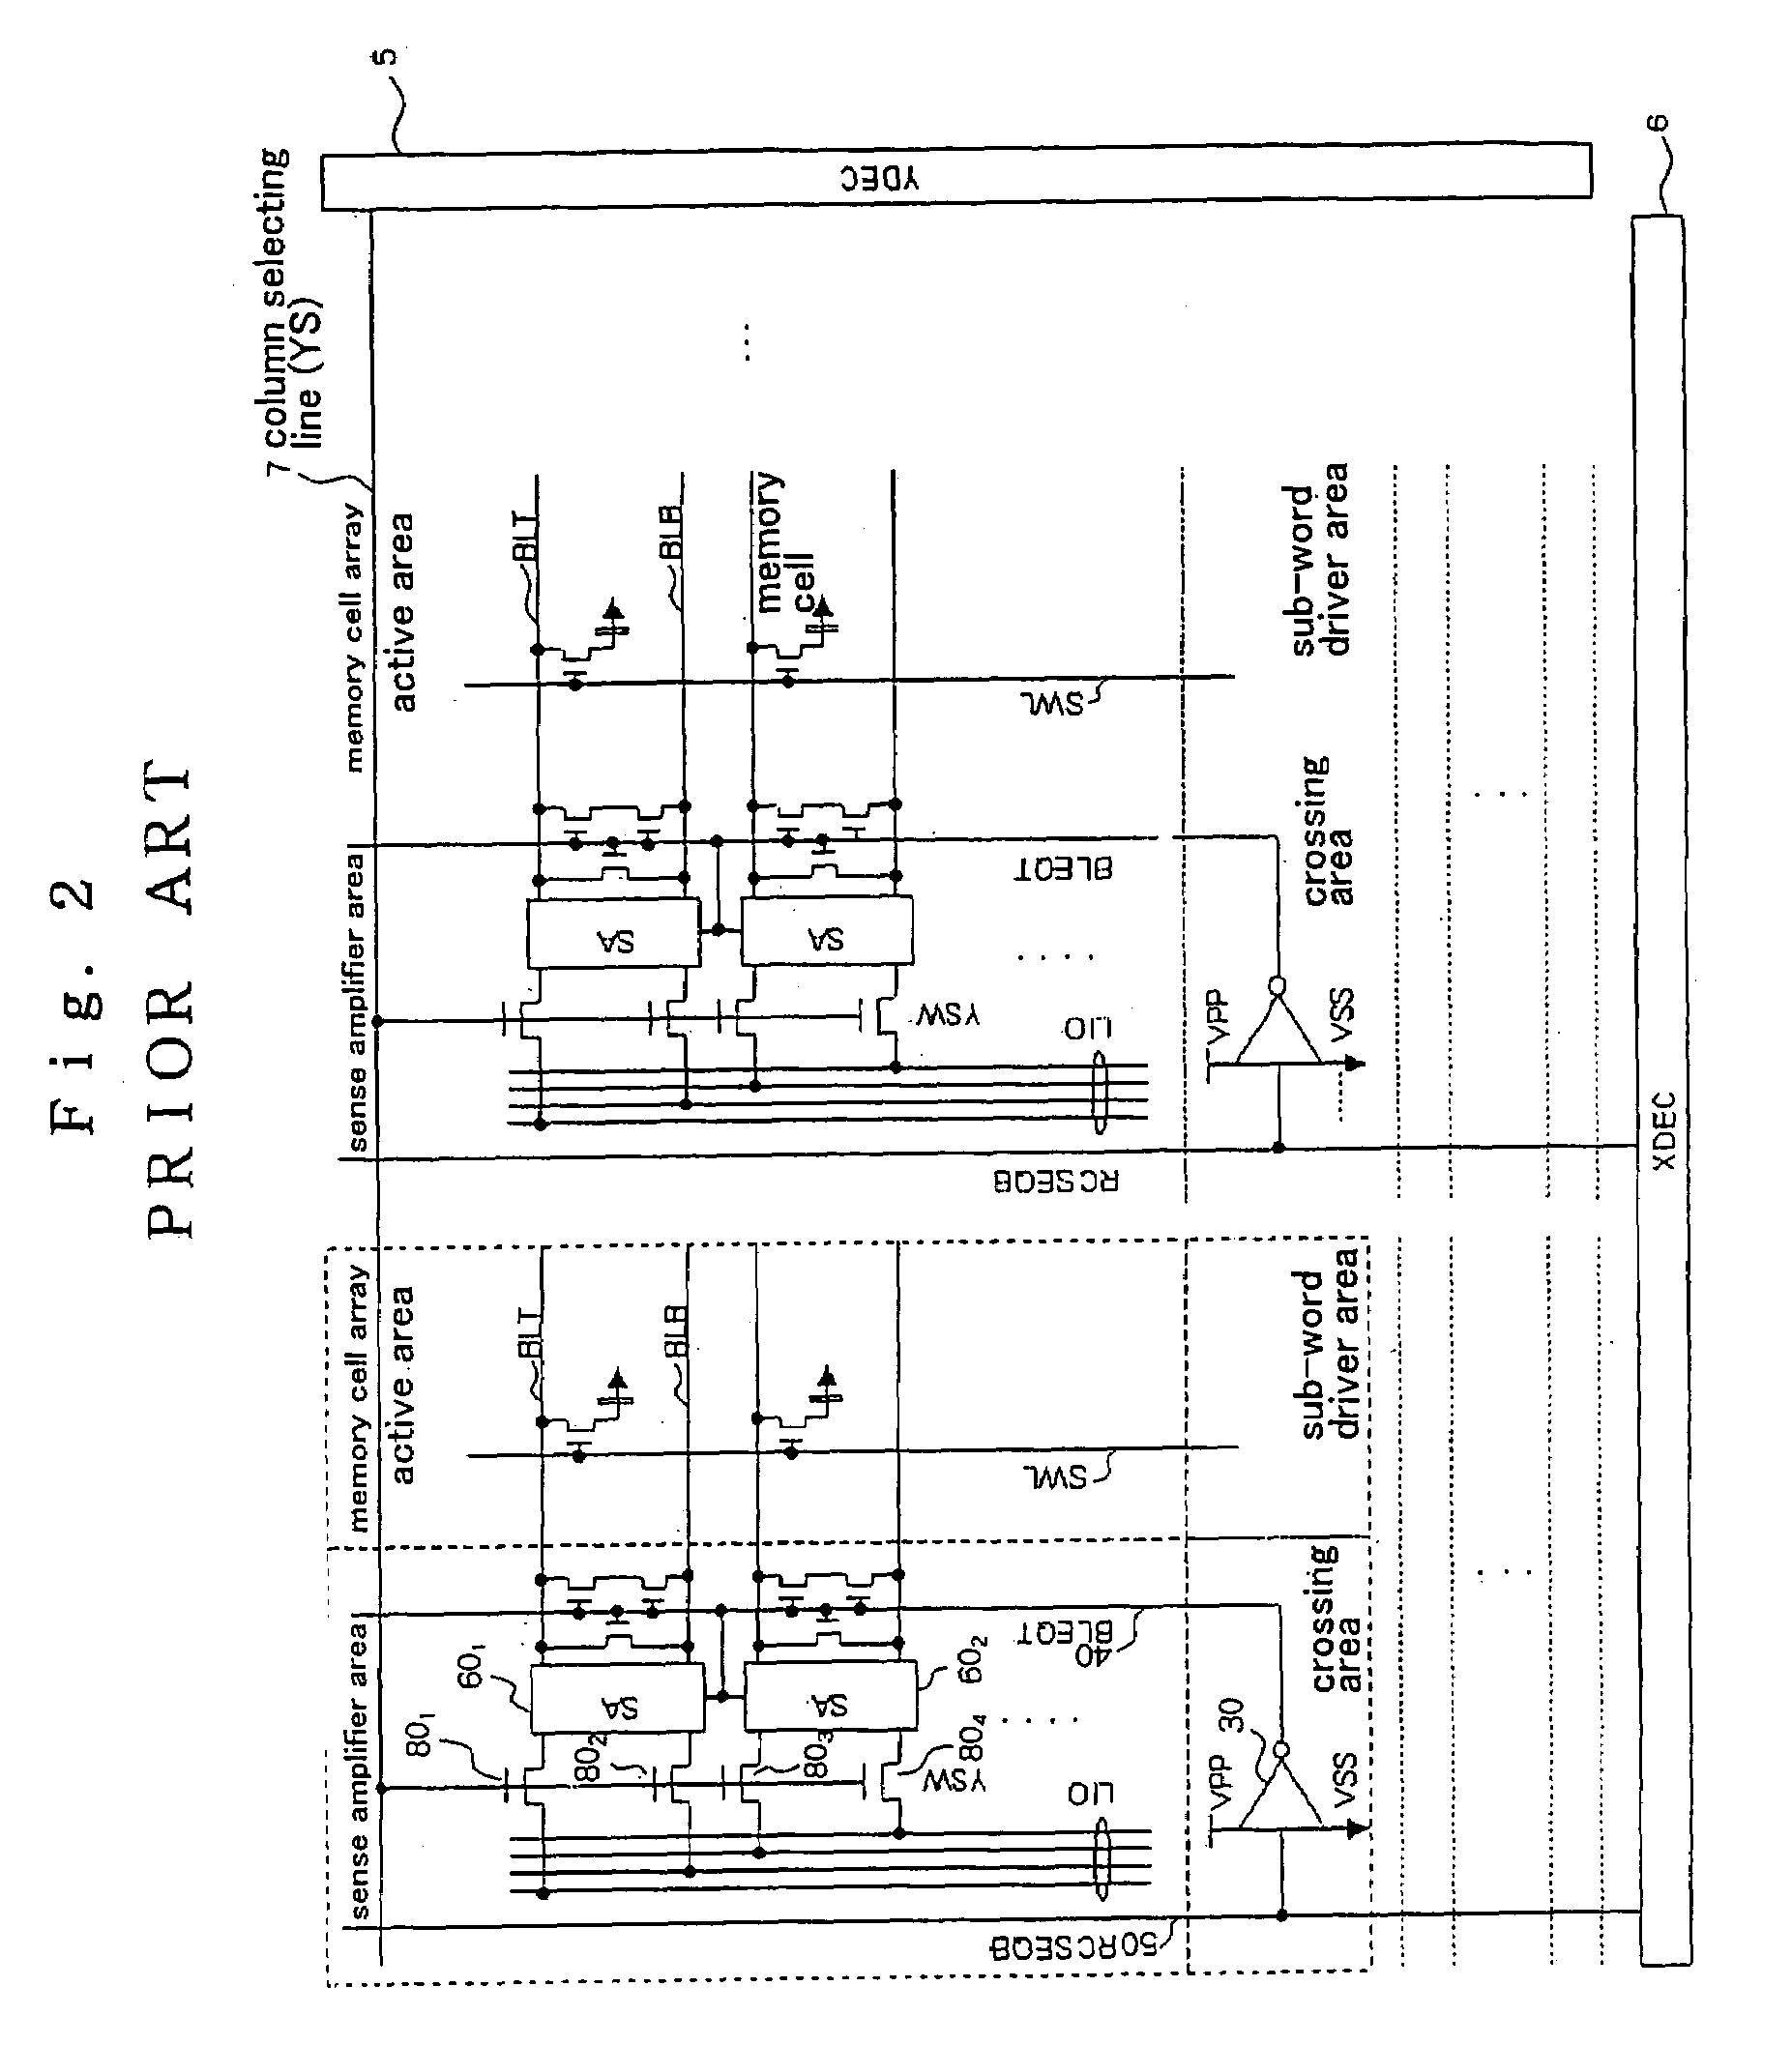 Semiconductor memory device with column selecting switches in hierarchical structure